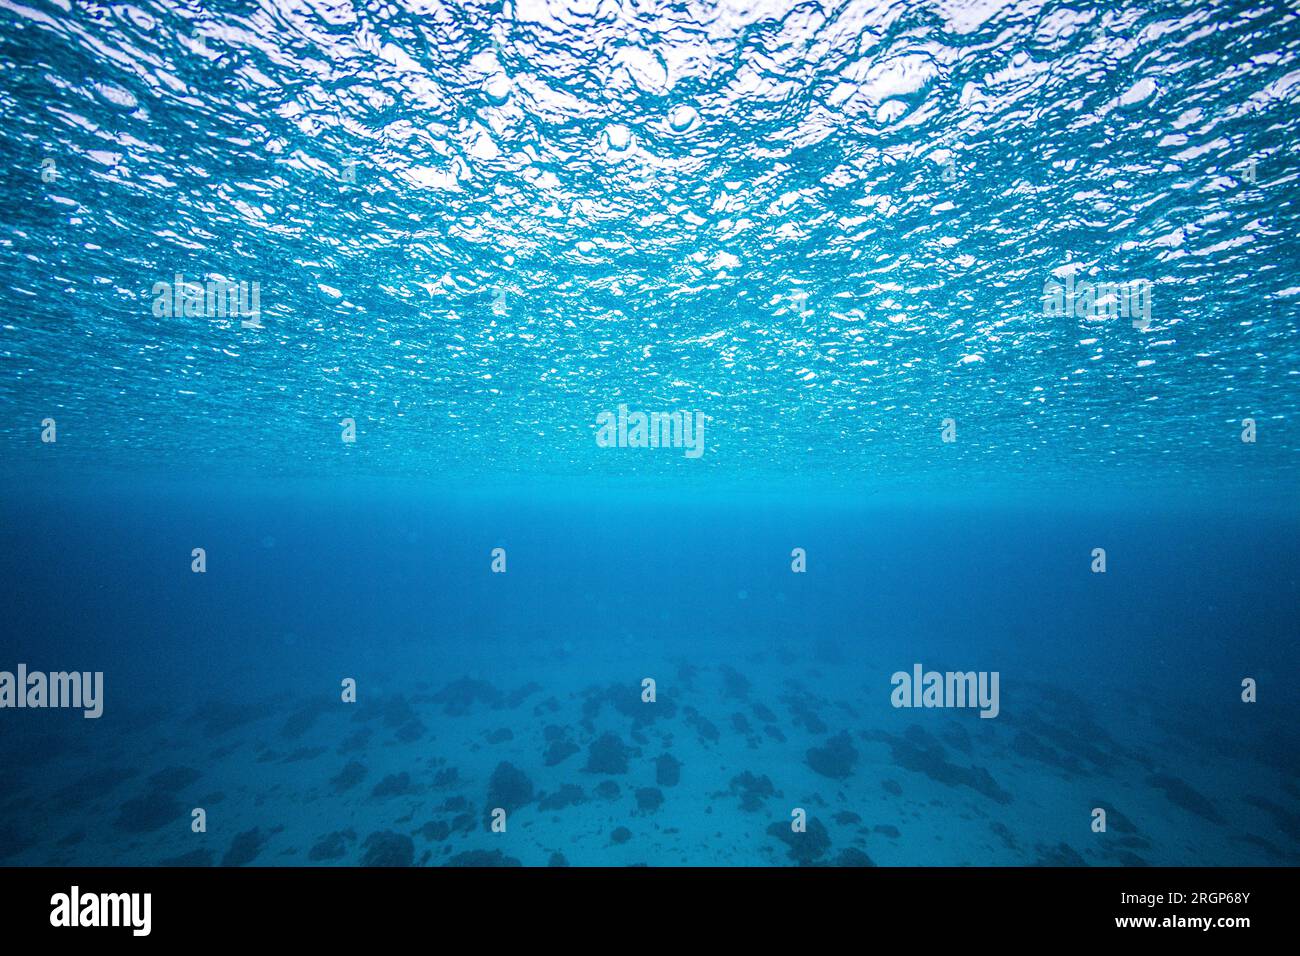 A rainy ocean surface picture taken underwater Stock Photo